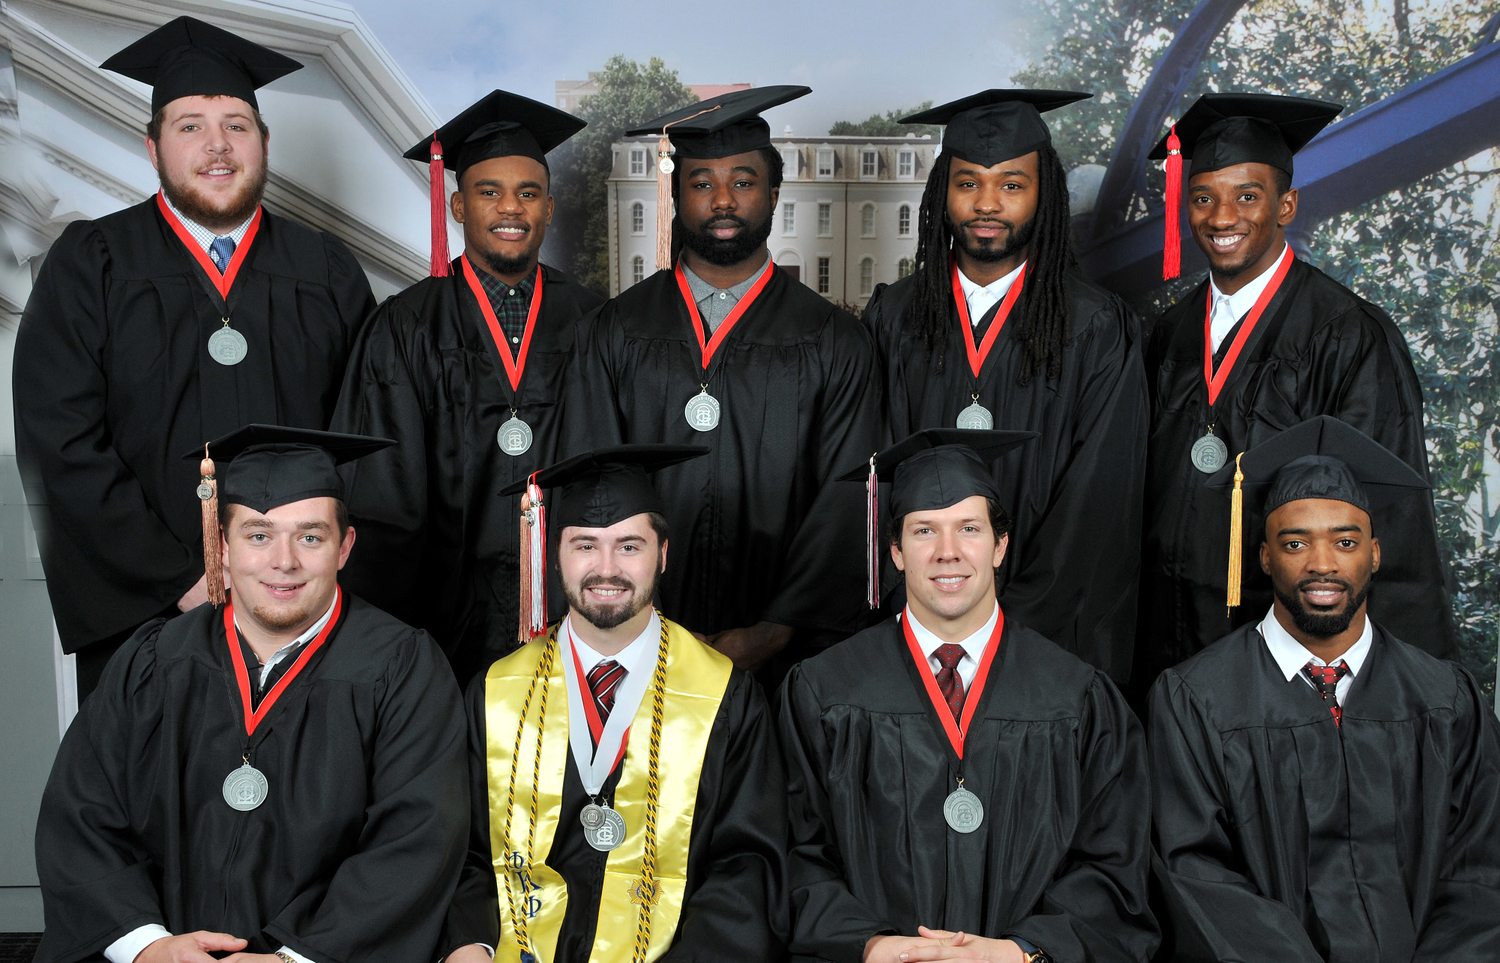 Front row (L to R): Cameron Faulkner, Patrick Beless, Ben Souther and Rantavious Wooten.  Back row (L to R): Hunter Long, Devin Bowman, Keith Marshall, Kennar Daniels-Johnson and Malcolm Mitchell.  Photo by Dan Evans